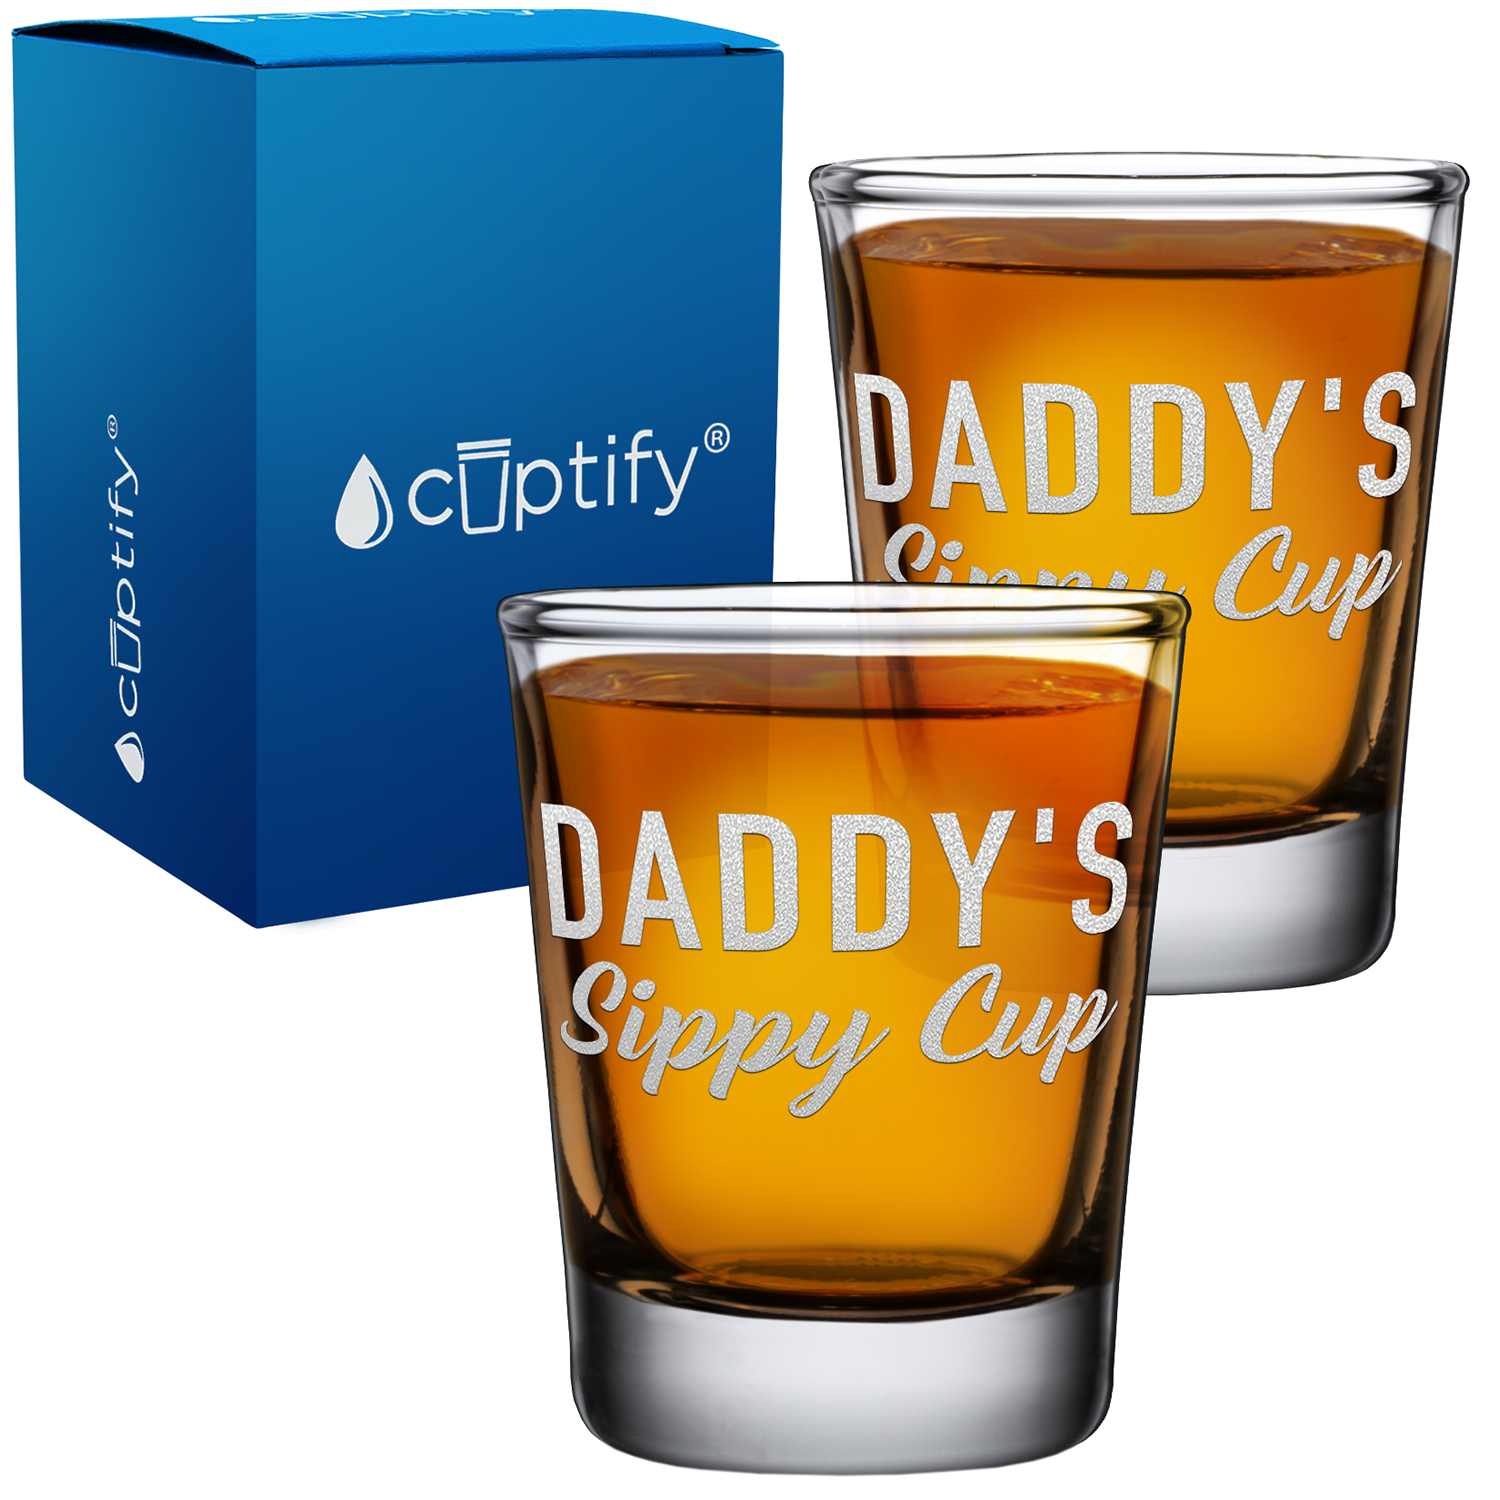 Daddy's Sippy Cup 2oz Shot Glasses - Set of 2